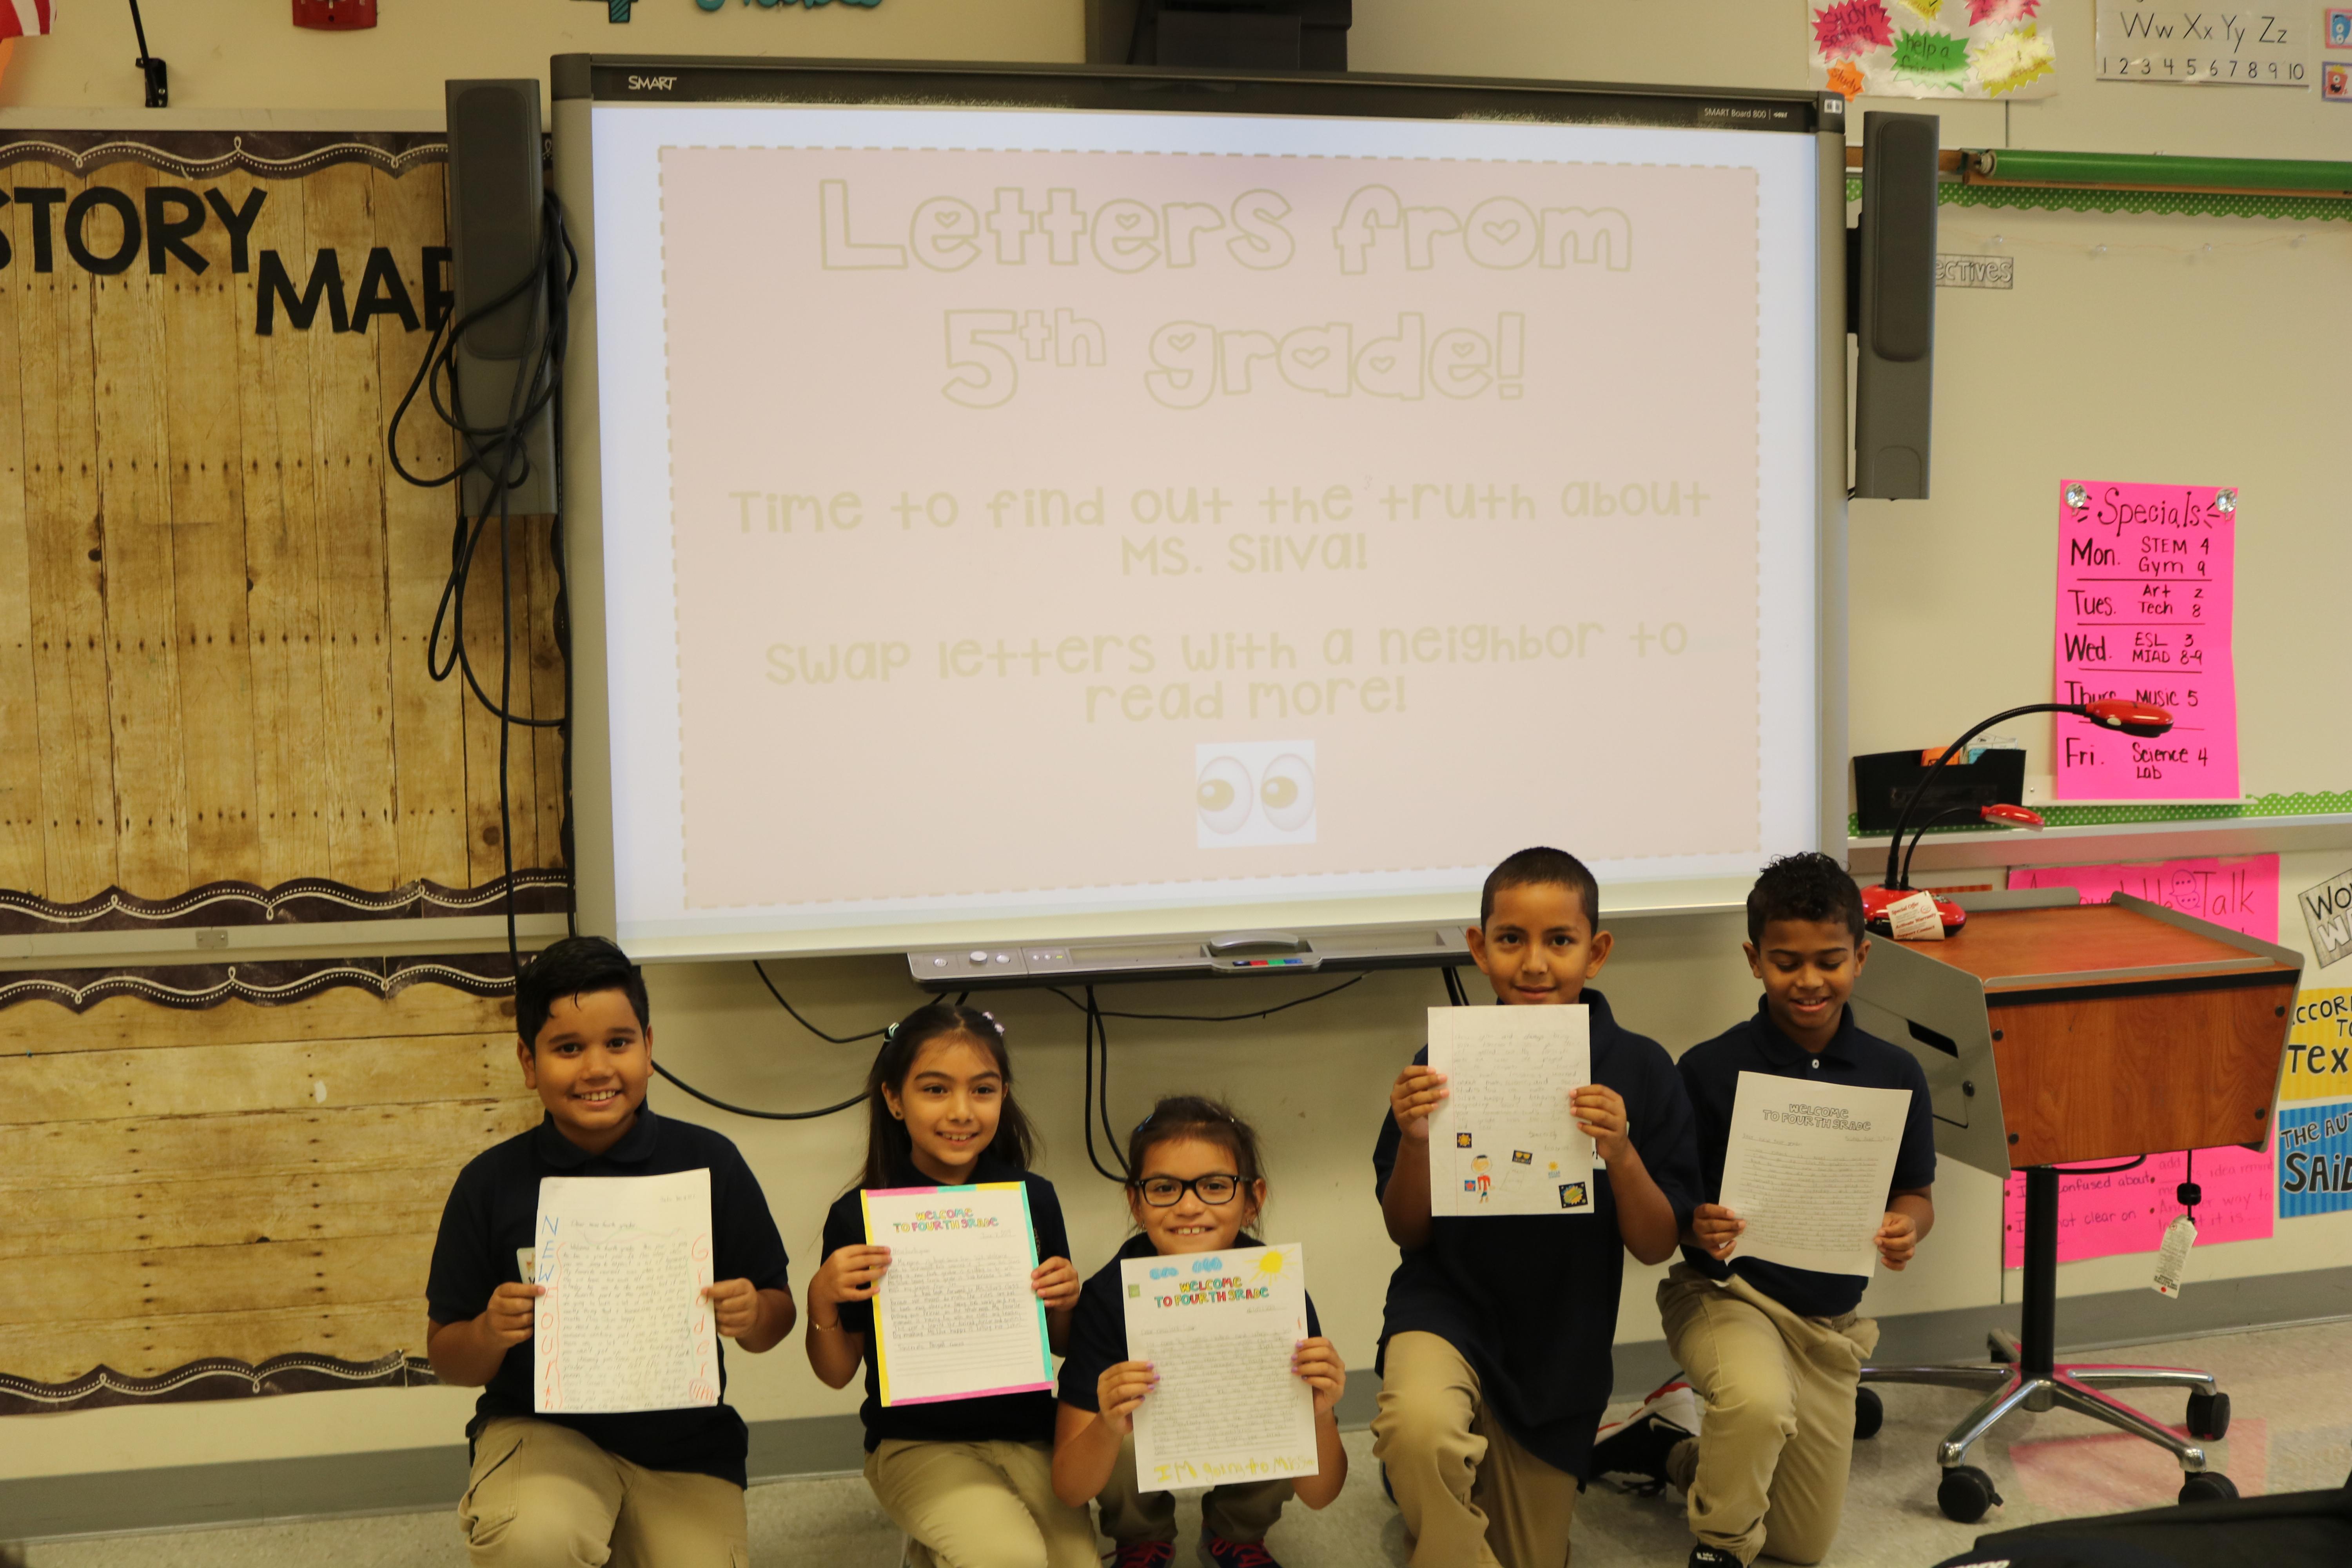 5th grade students proudly showing off their first assignments